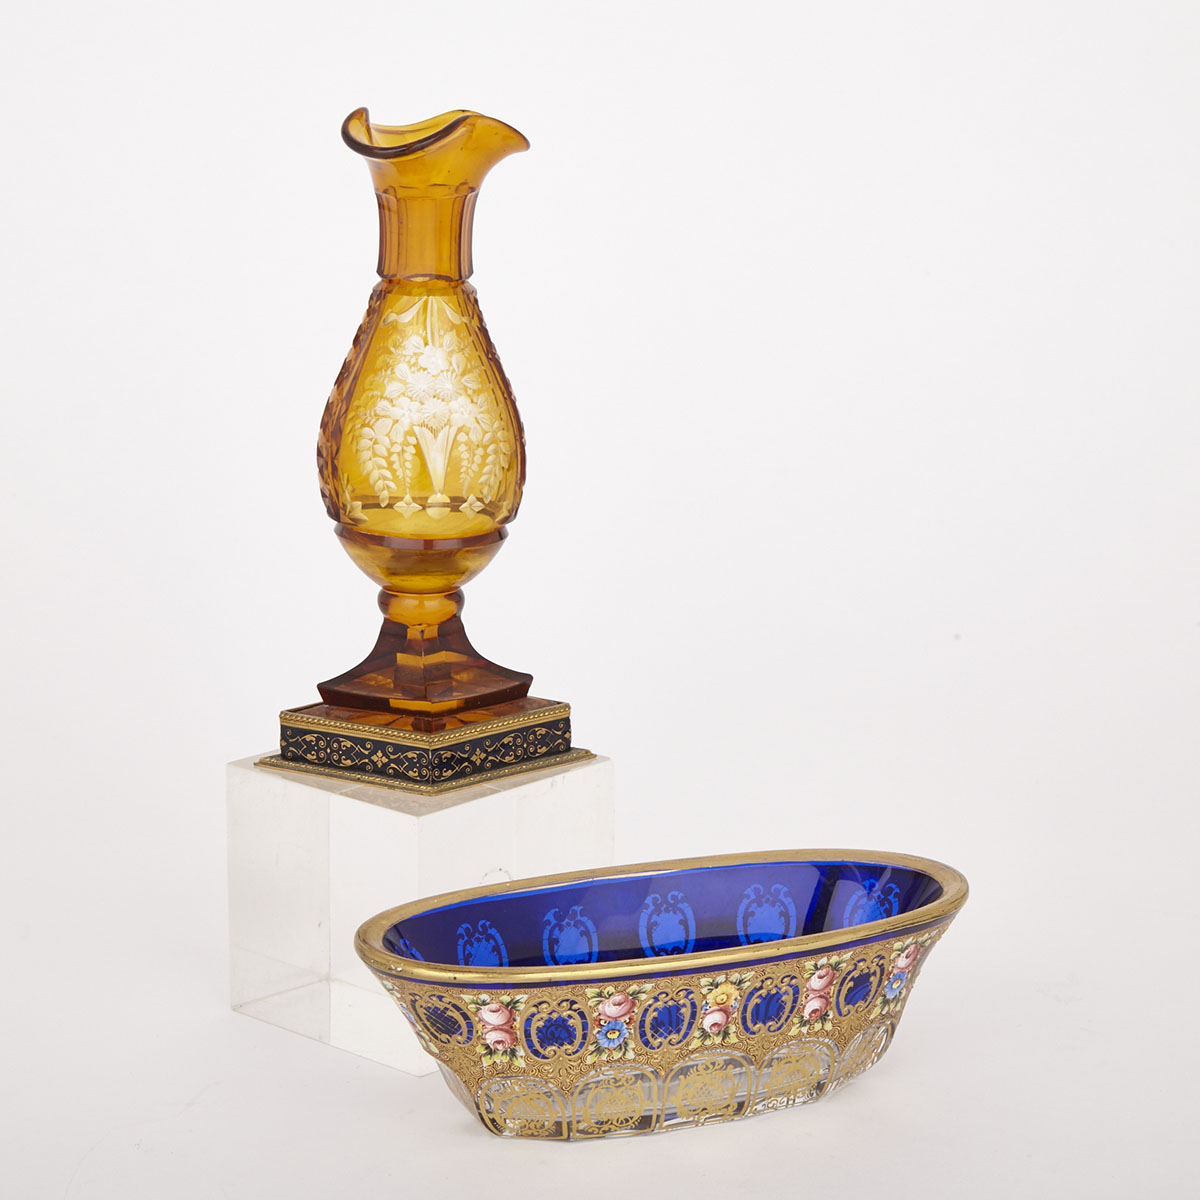 Bohemian Blue Overlaid Gilt and Enameled Oval Bowl and an Amber Overlaid Cut Glass Vase, late 19th/early 20th century